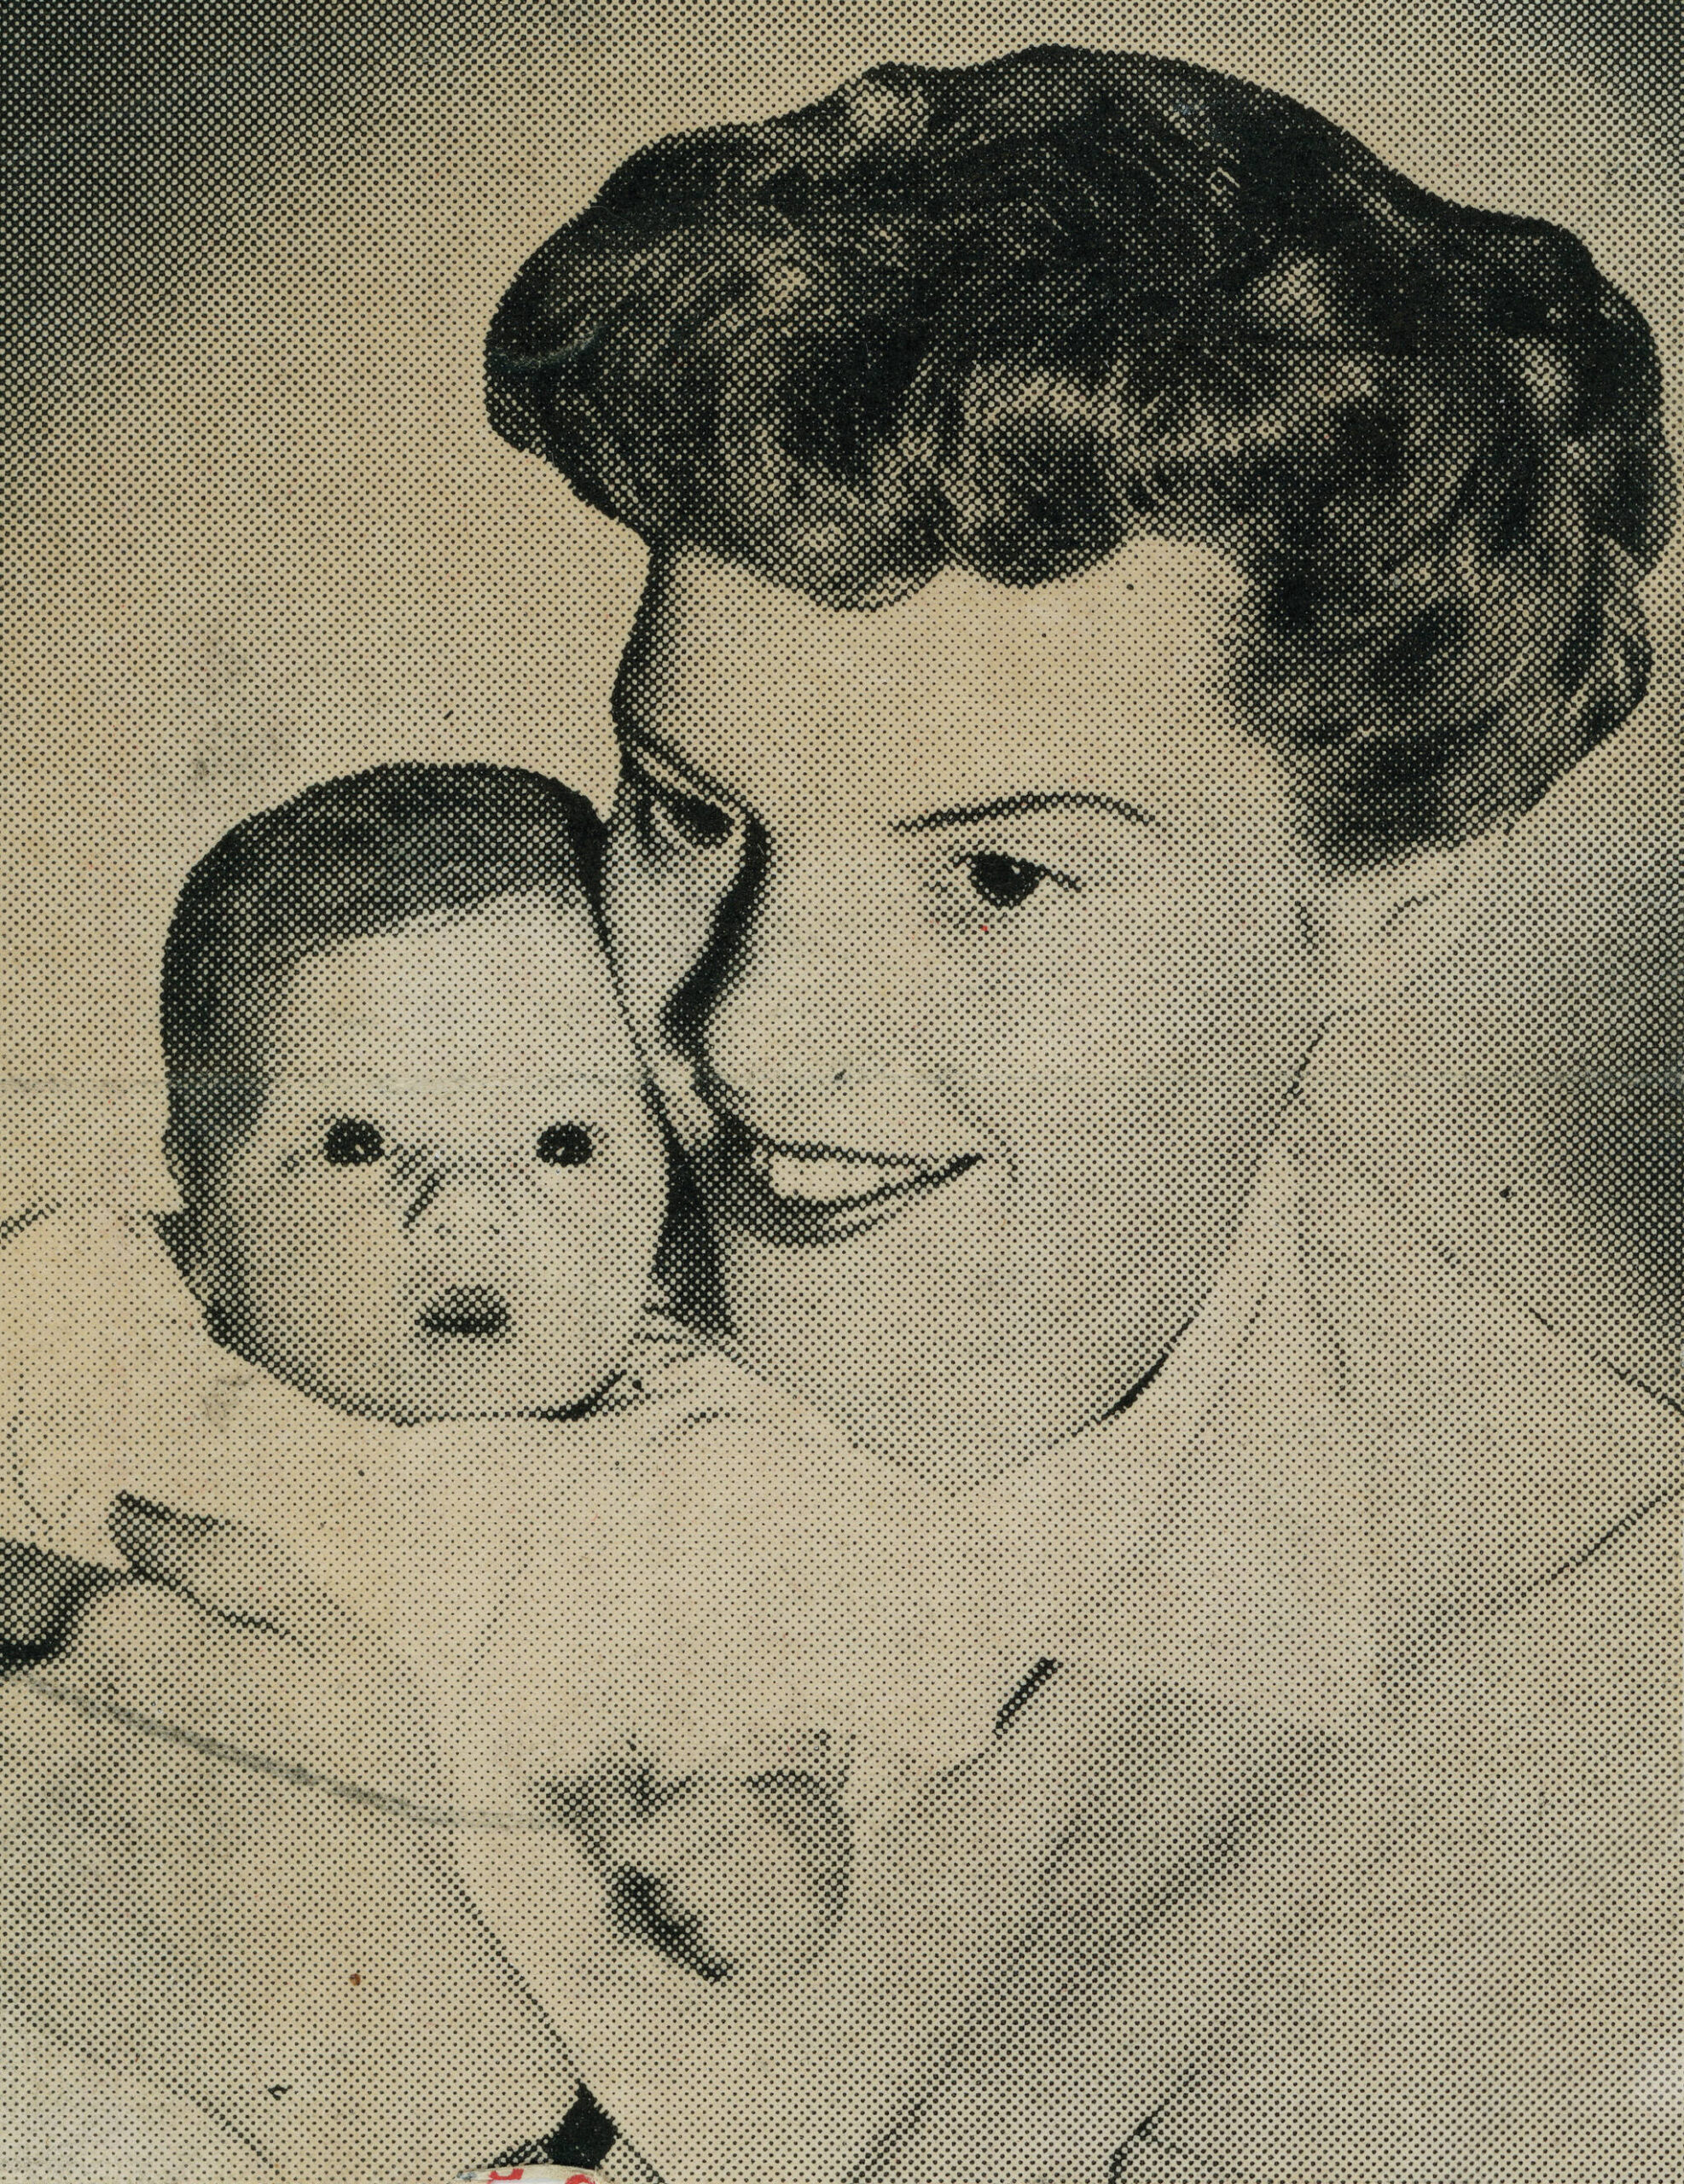 A smiling Rusty Lancashire holds her three-week-old daughter Martha for a 1943 portrait she hoped to send to her husband Larry, who was stationed overseas during World War II. (Photo courtesy of the Lancashire Family Collection)